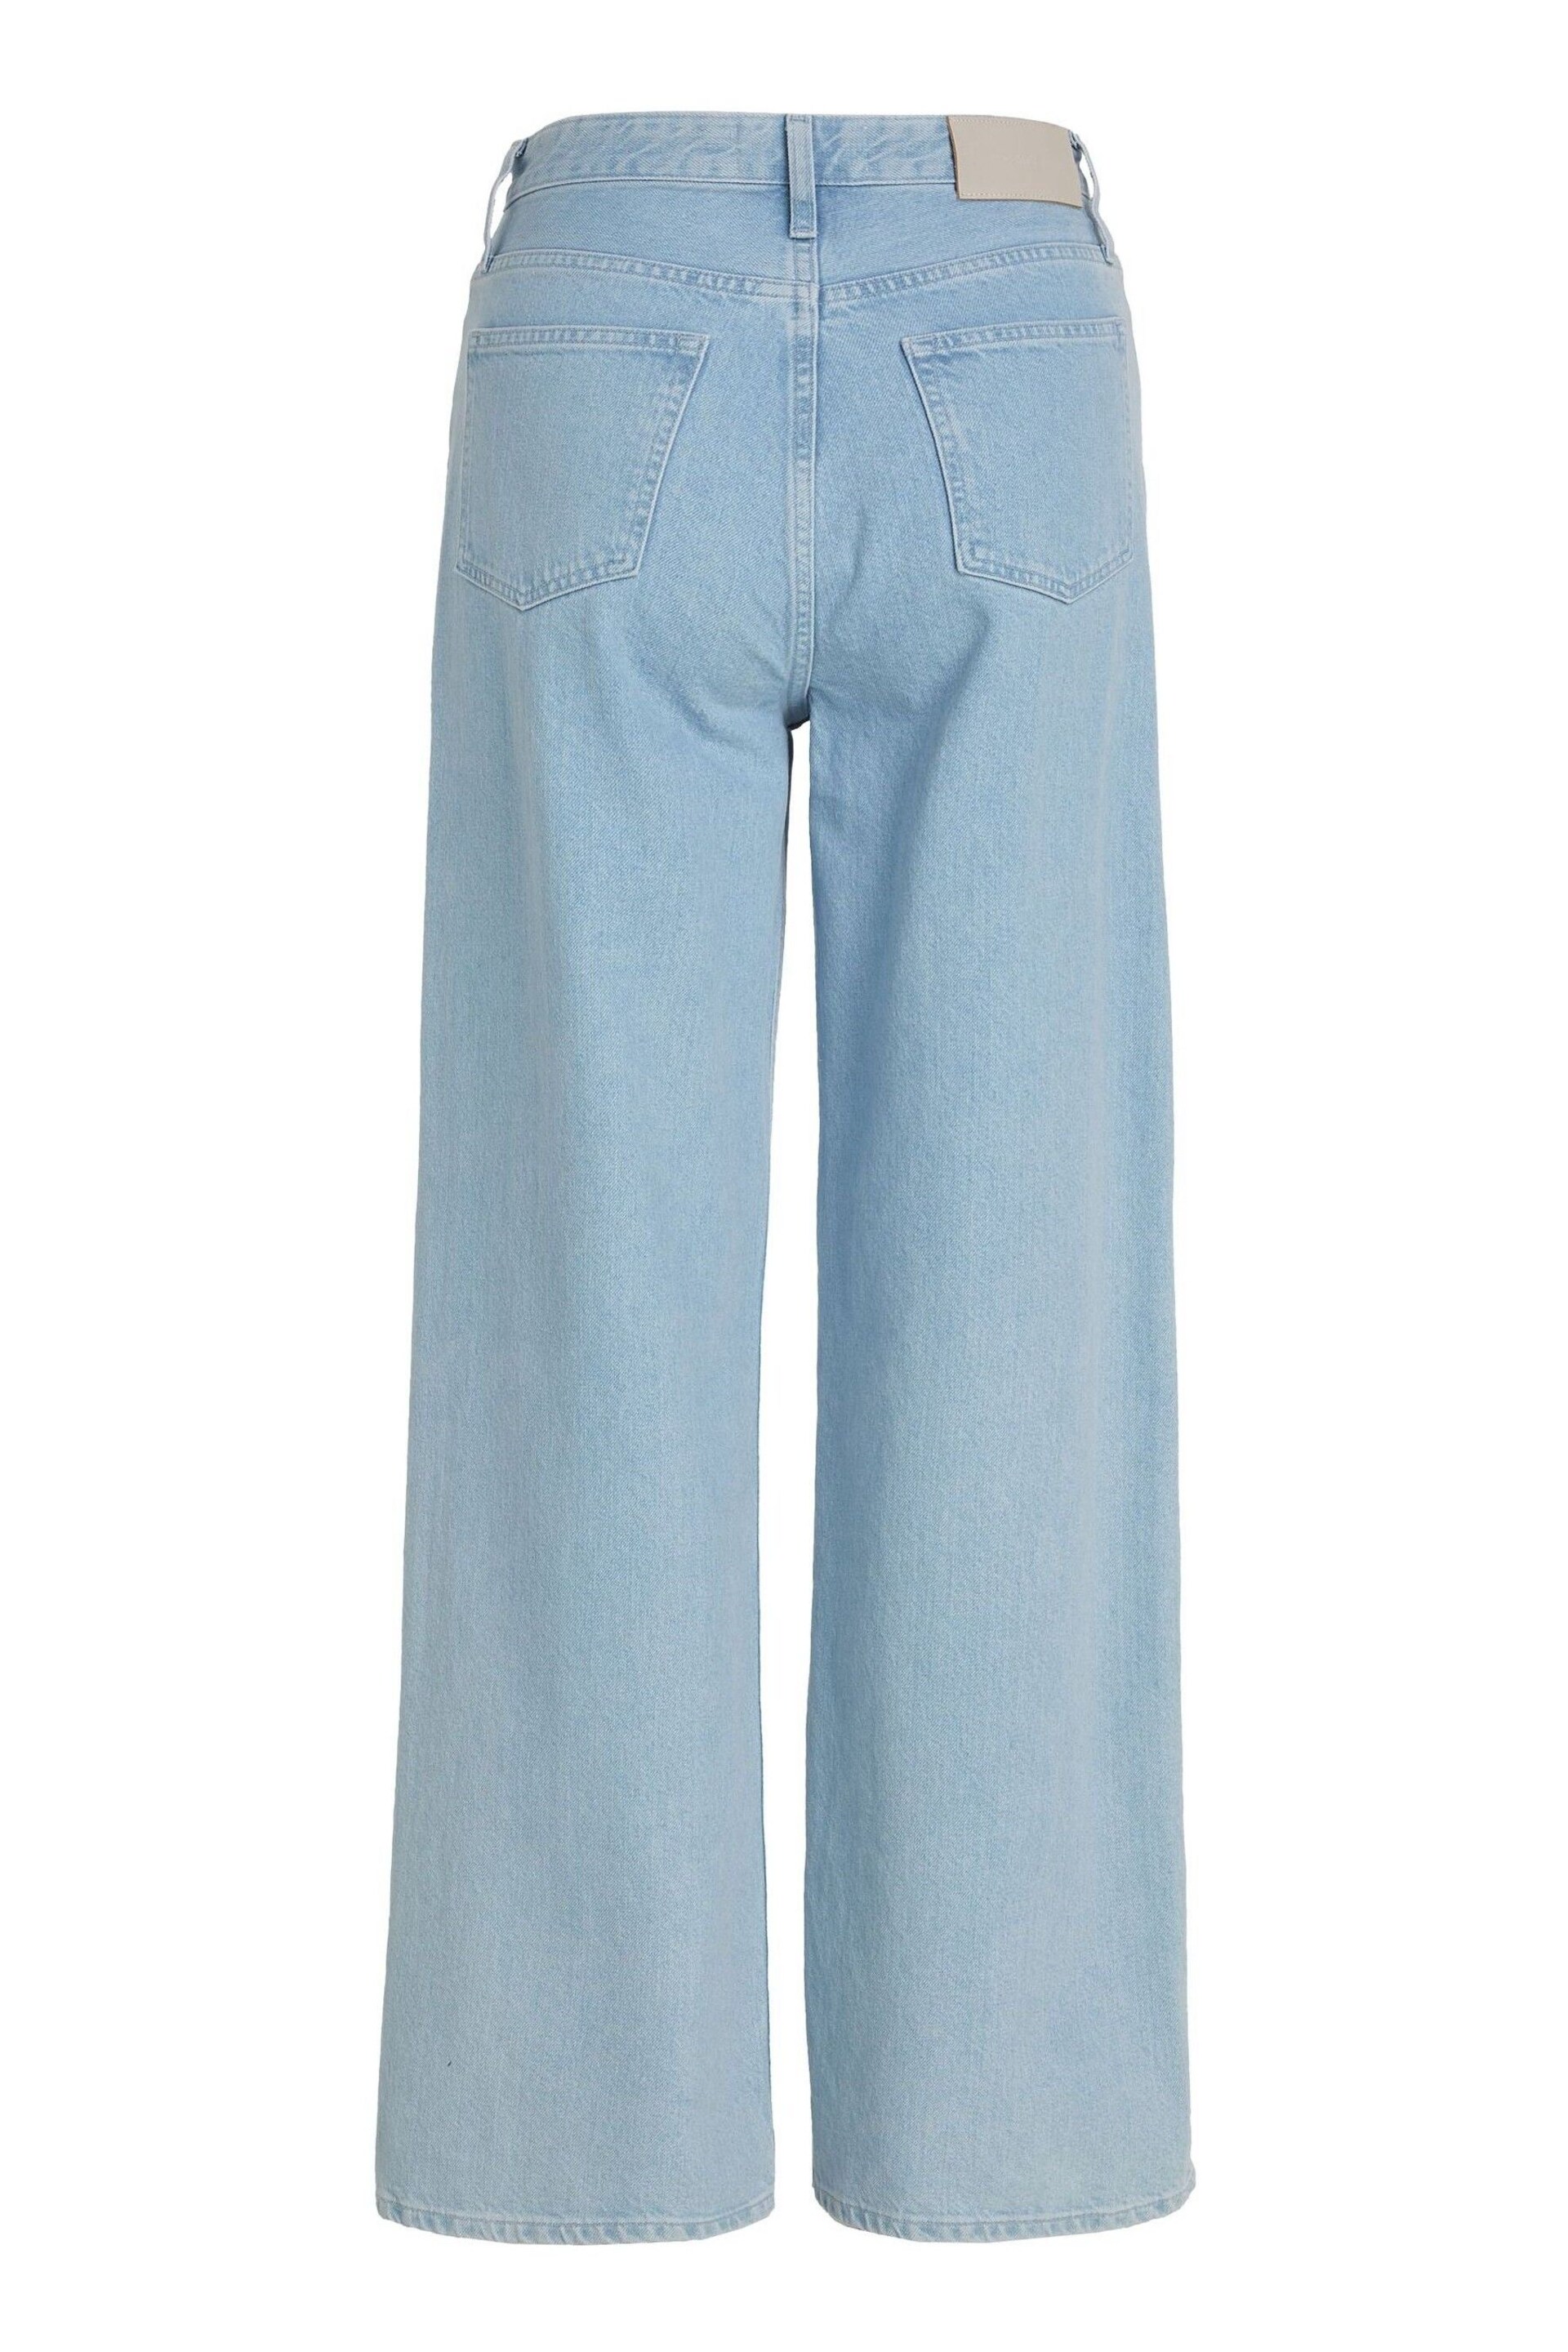 Calvin Klein Jeans High Rise Relaxed Jeans - Image 2 of 5